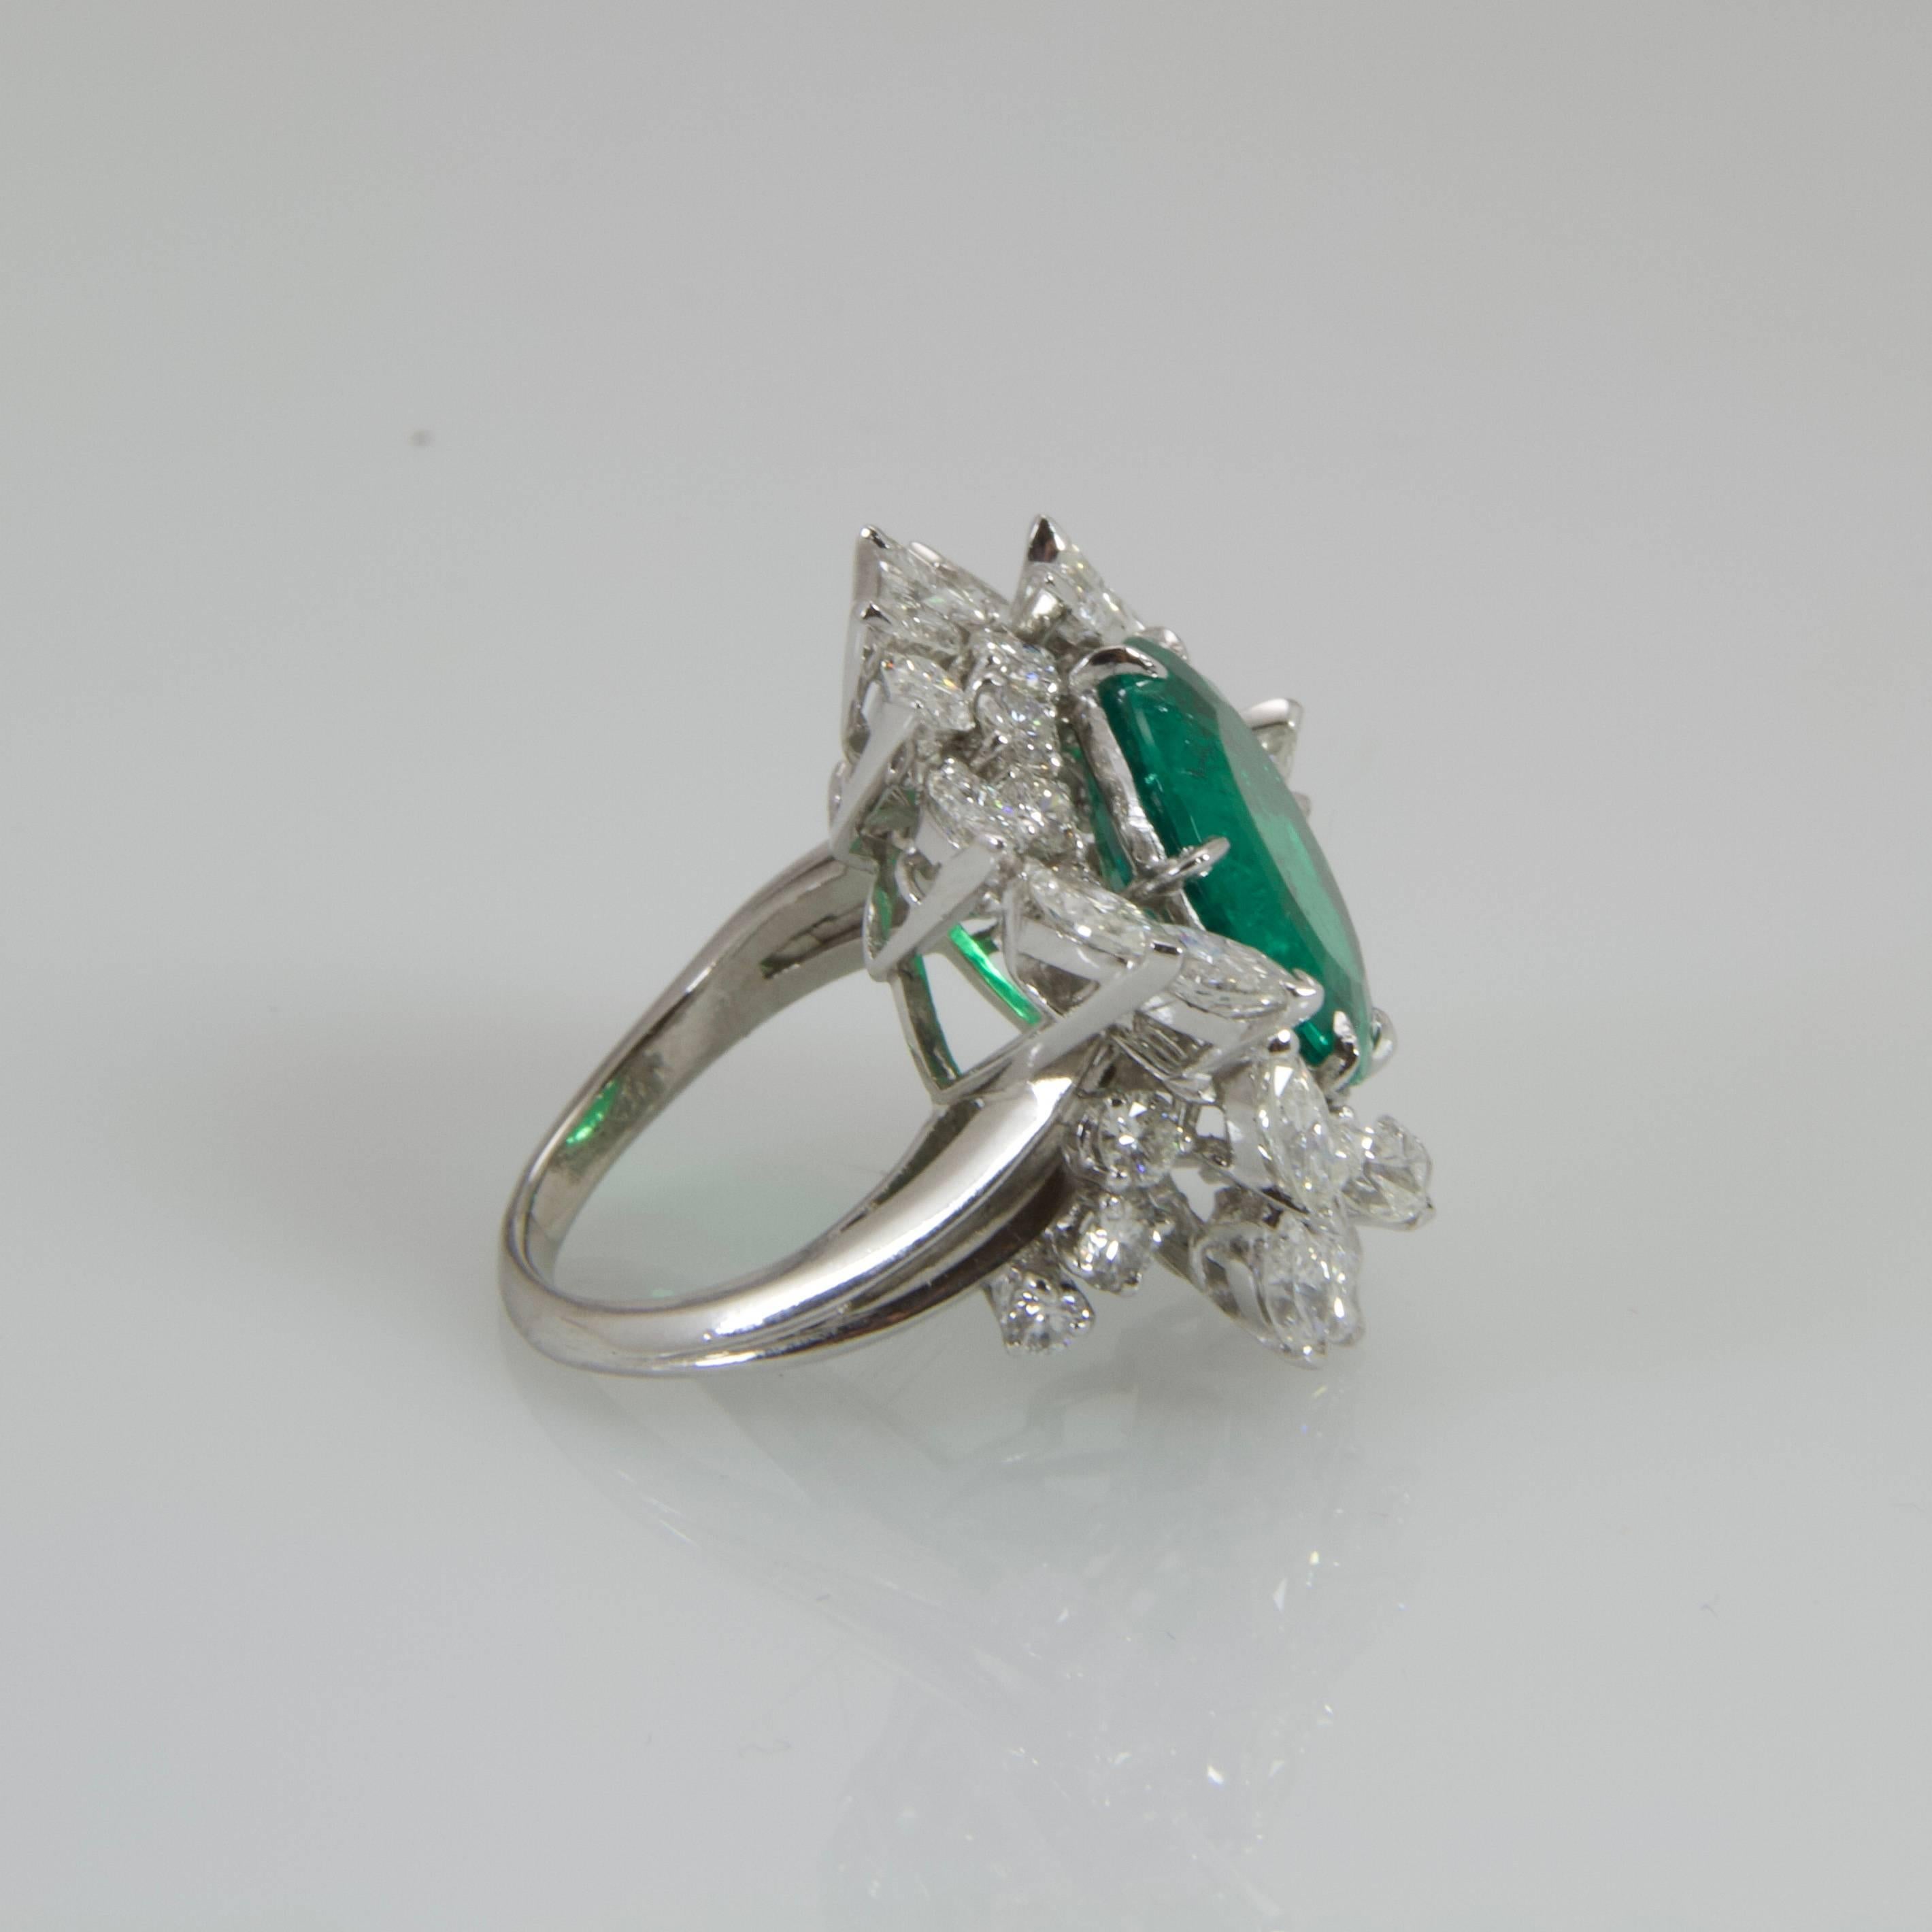 Very brilliant platinum cocktail ring set with 7.23 cts round shape Colombian emerald and ahanced by two lines of twisted marquise diamonds of very good quality. 
Certificat from GEM Paris saying Colombie Minor. Very green on daylight and very